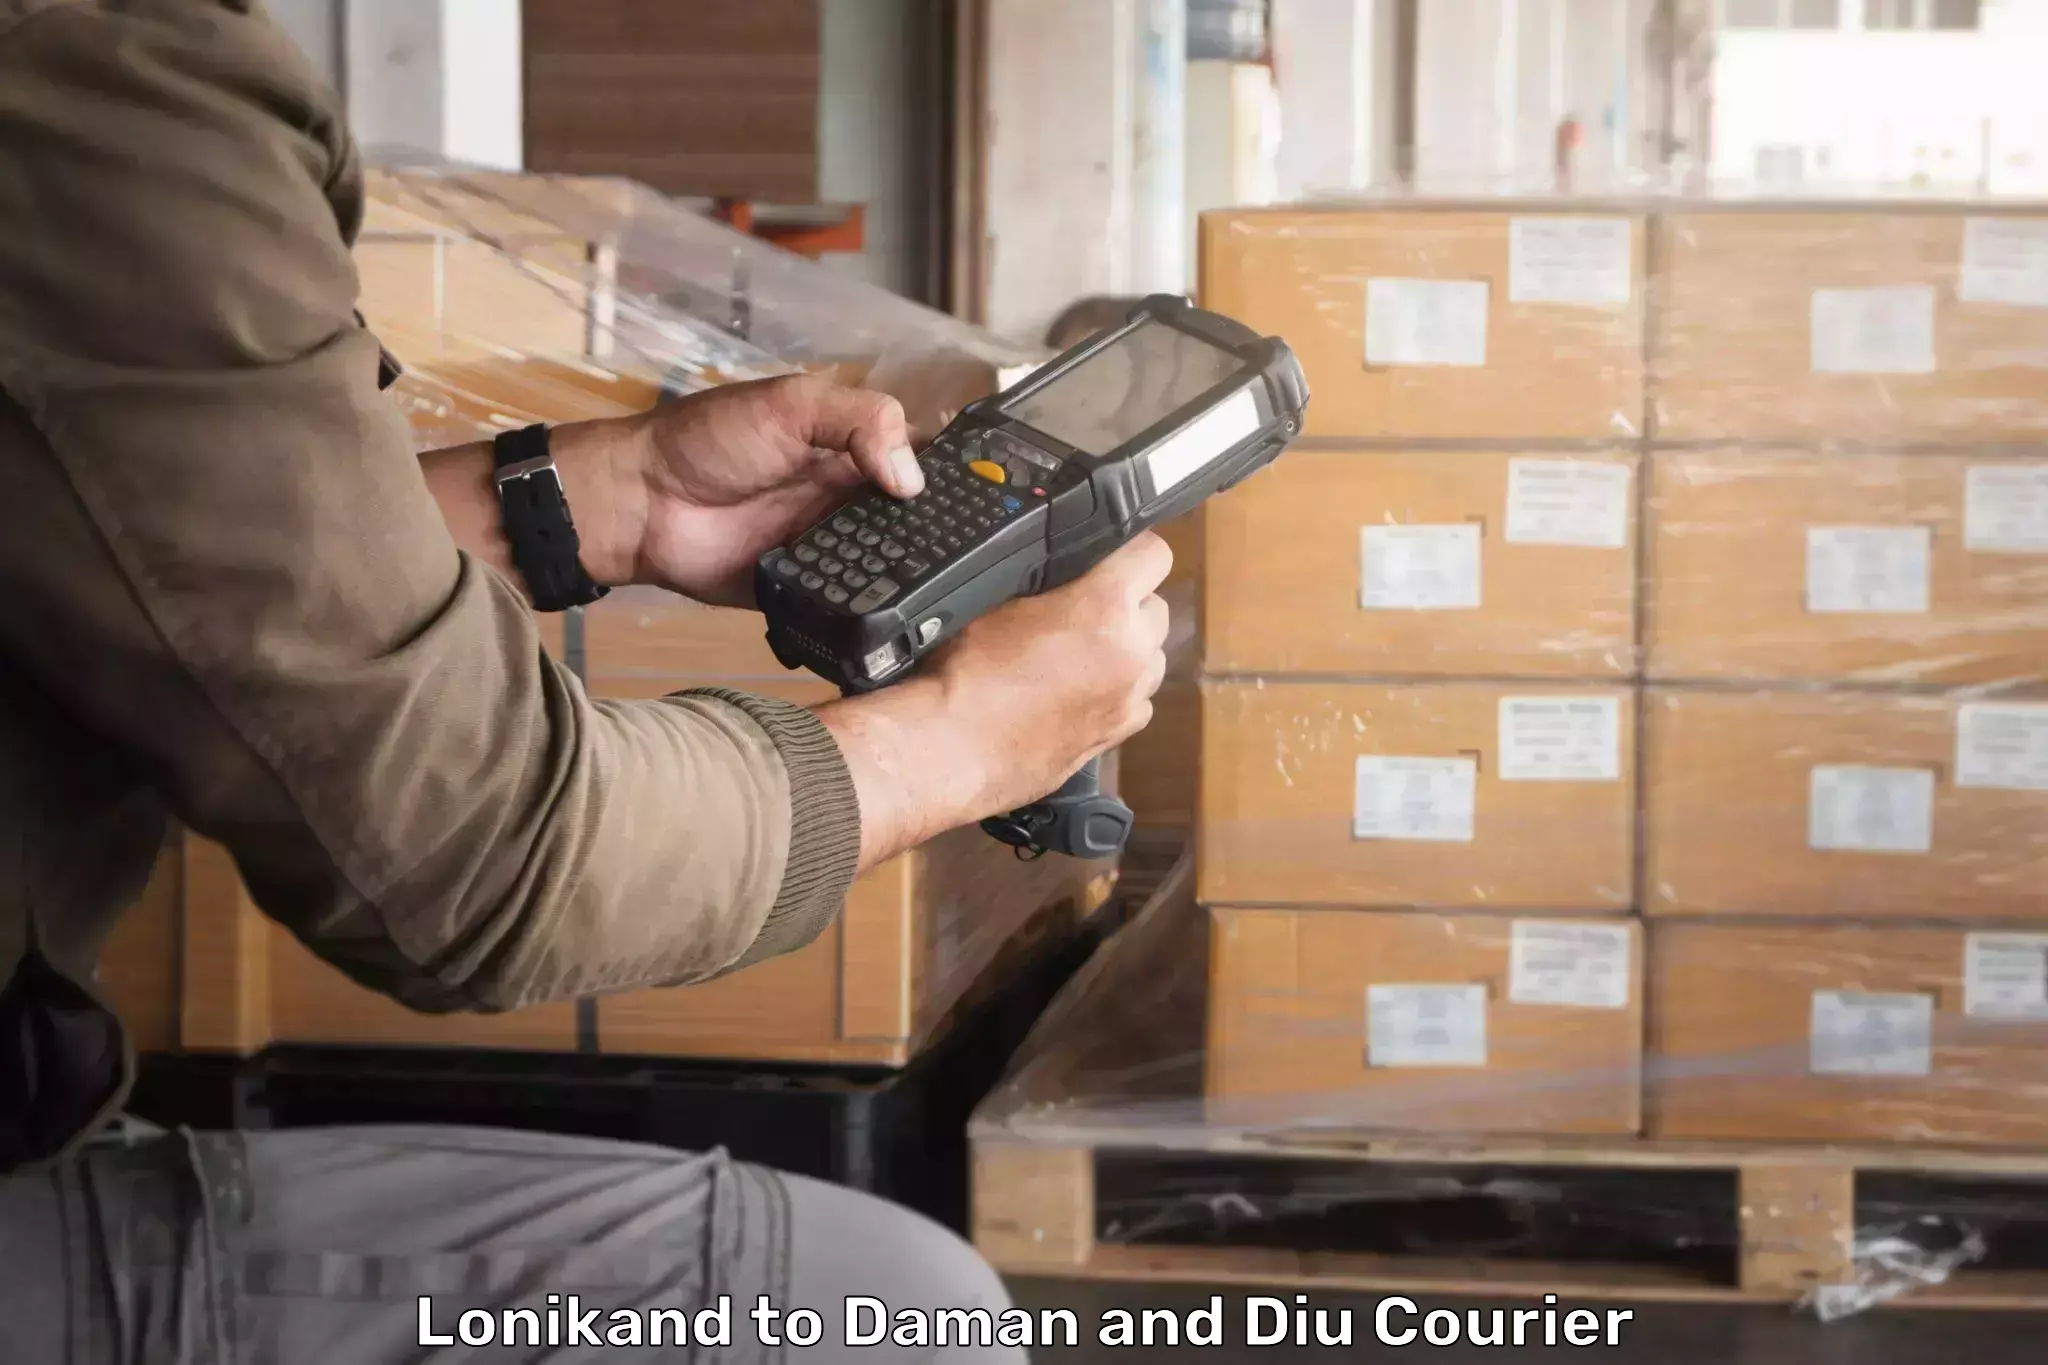 24-hour courier service Lonikand to Daman and Diu